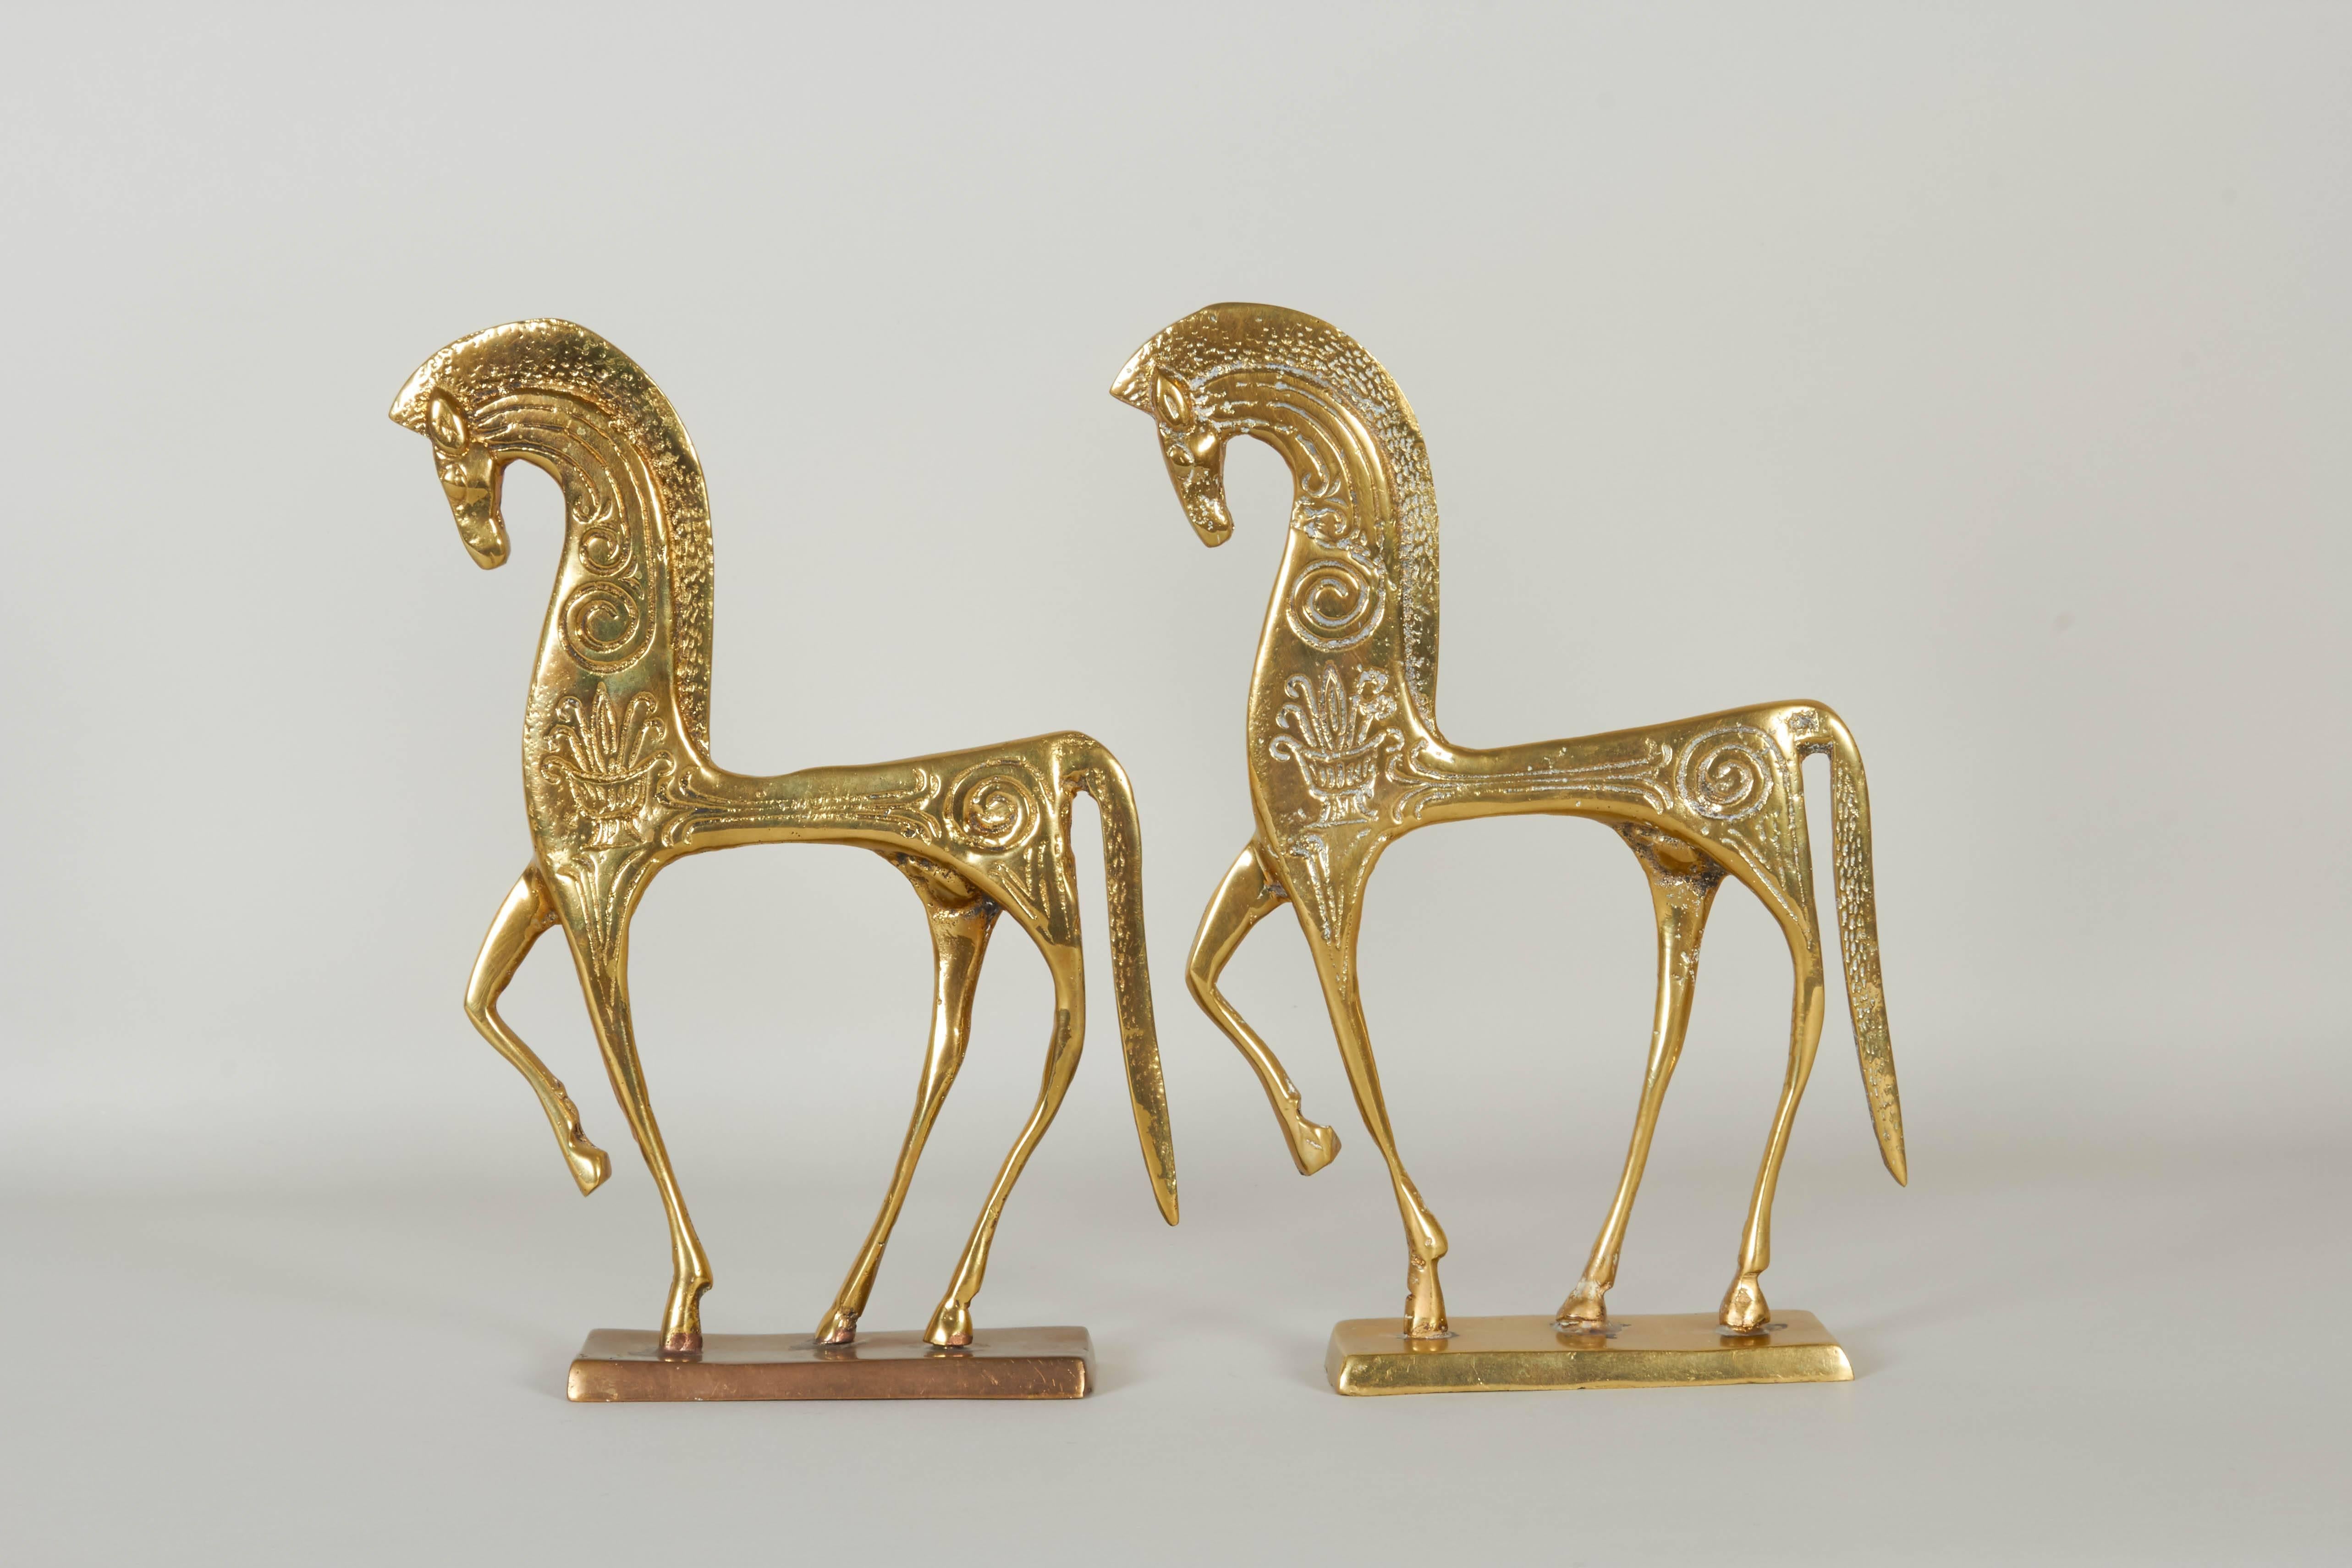 A pair of vintage Etruscan horse figurines in brass by designer Frederic Weinberg, each modeled flat, decorated with swirling patterns, mounted on rectangular bases. The figures remain in very good vintage condition, with presence of age appropriate